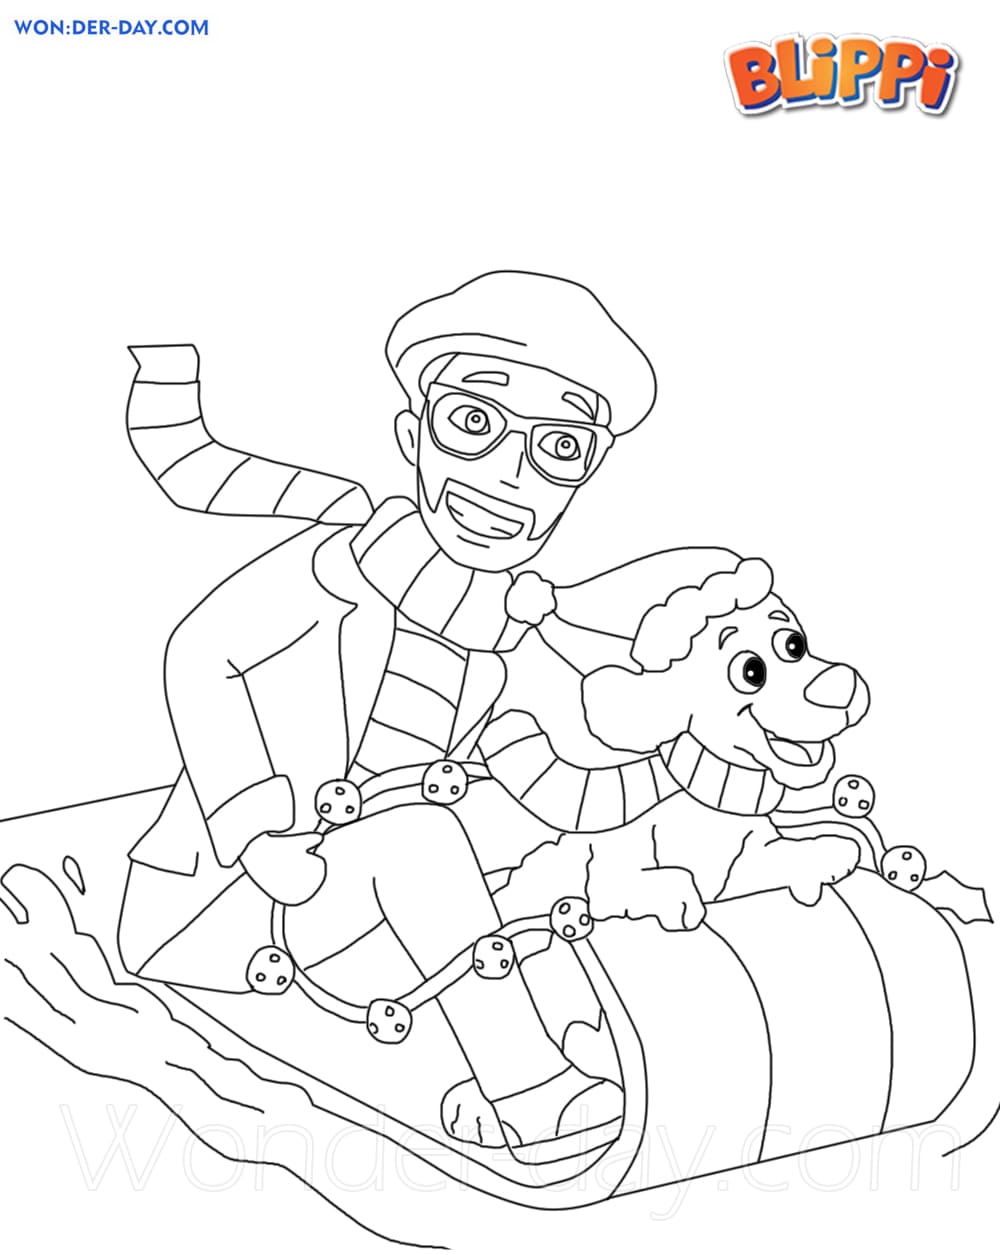 Download Free Printable Blippi Coloring Pages For Kids Wonder Day Coloring Pages For Children And Adults